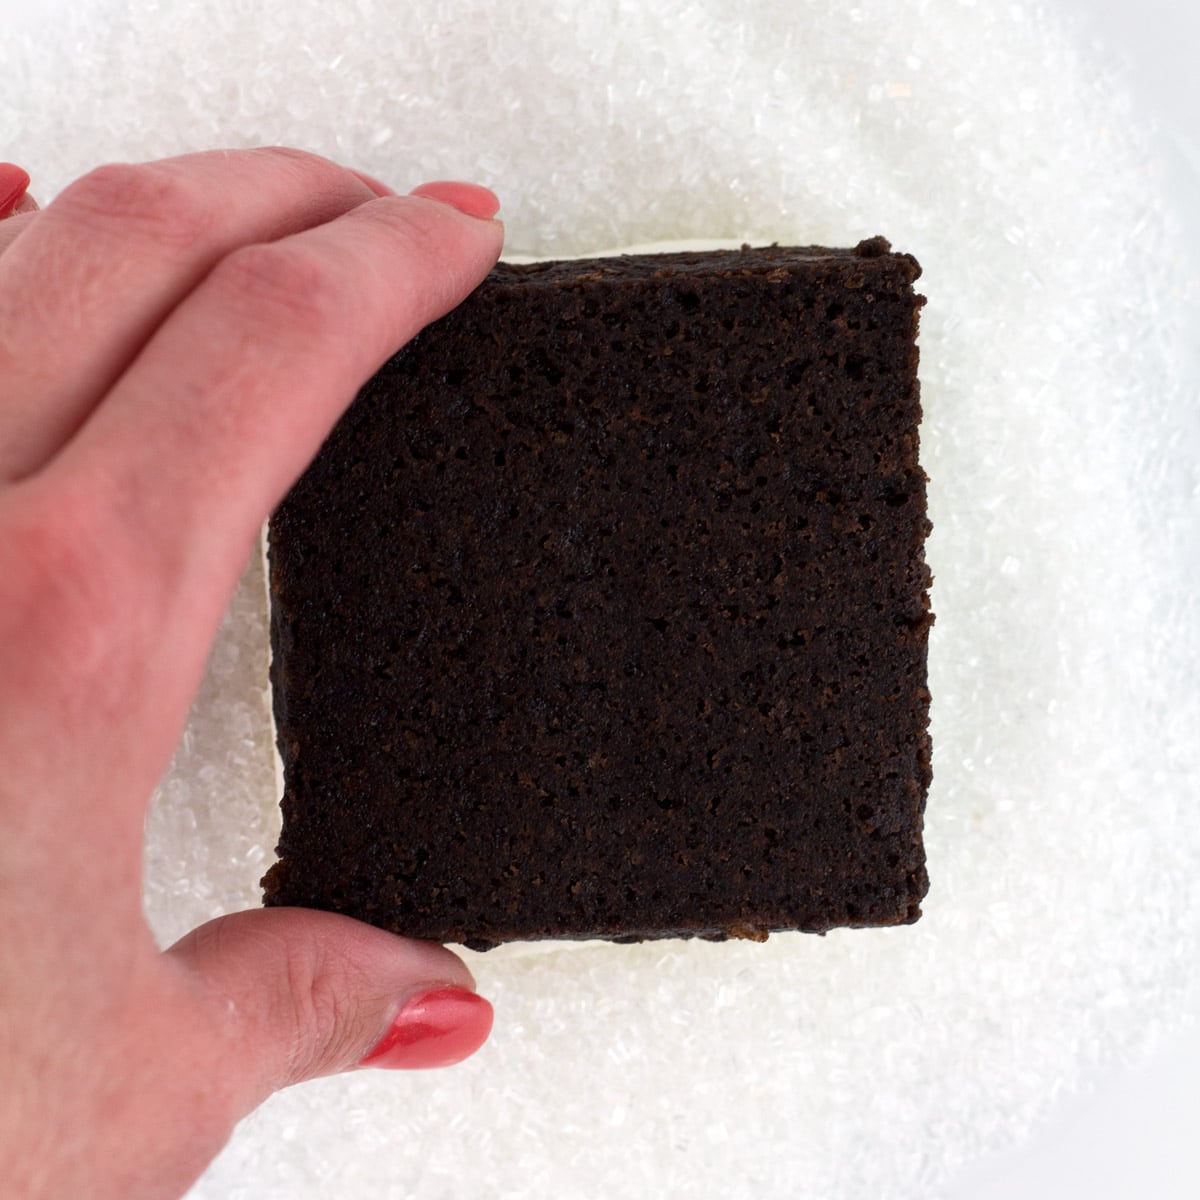 A hand dipping a frosted brownie into large sugar sprinkles.